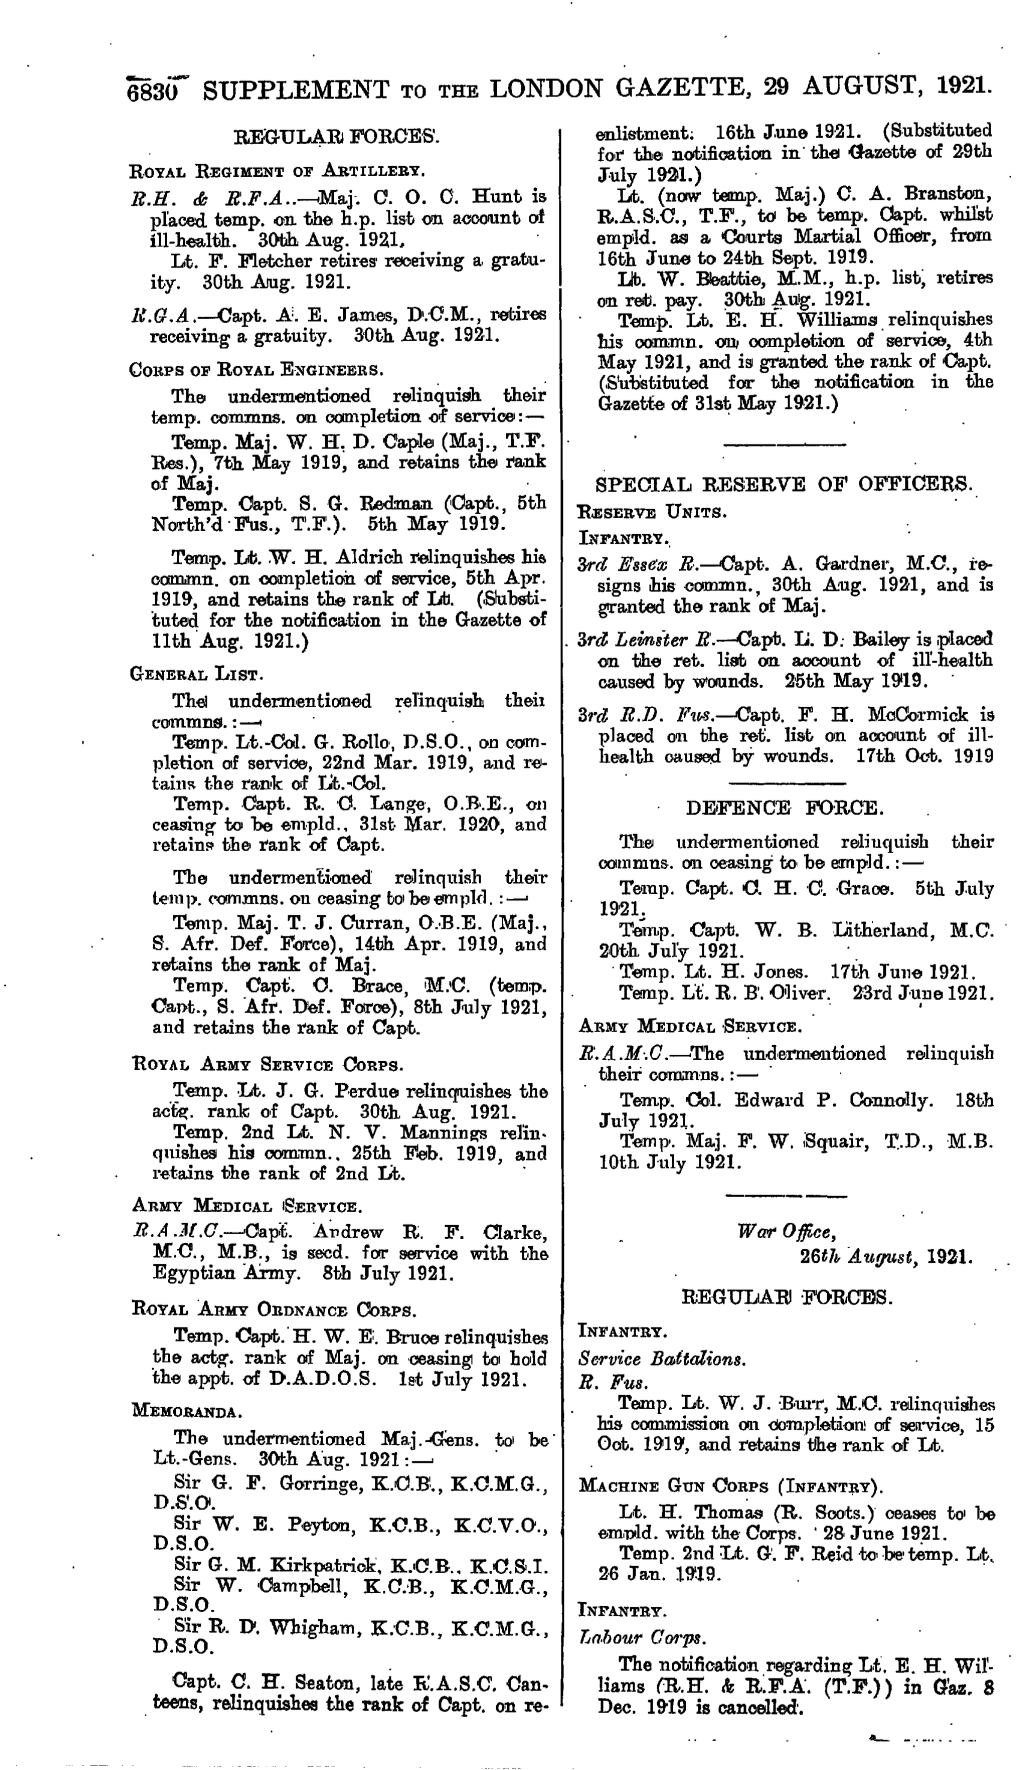 683(T Supplement to the London Gazette, 29 August, 1921